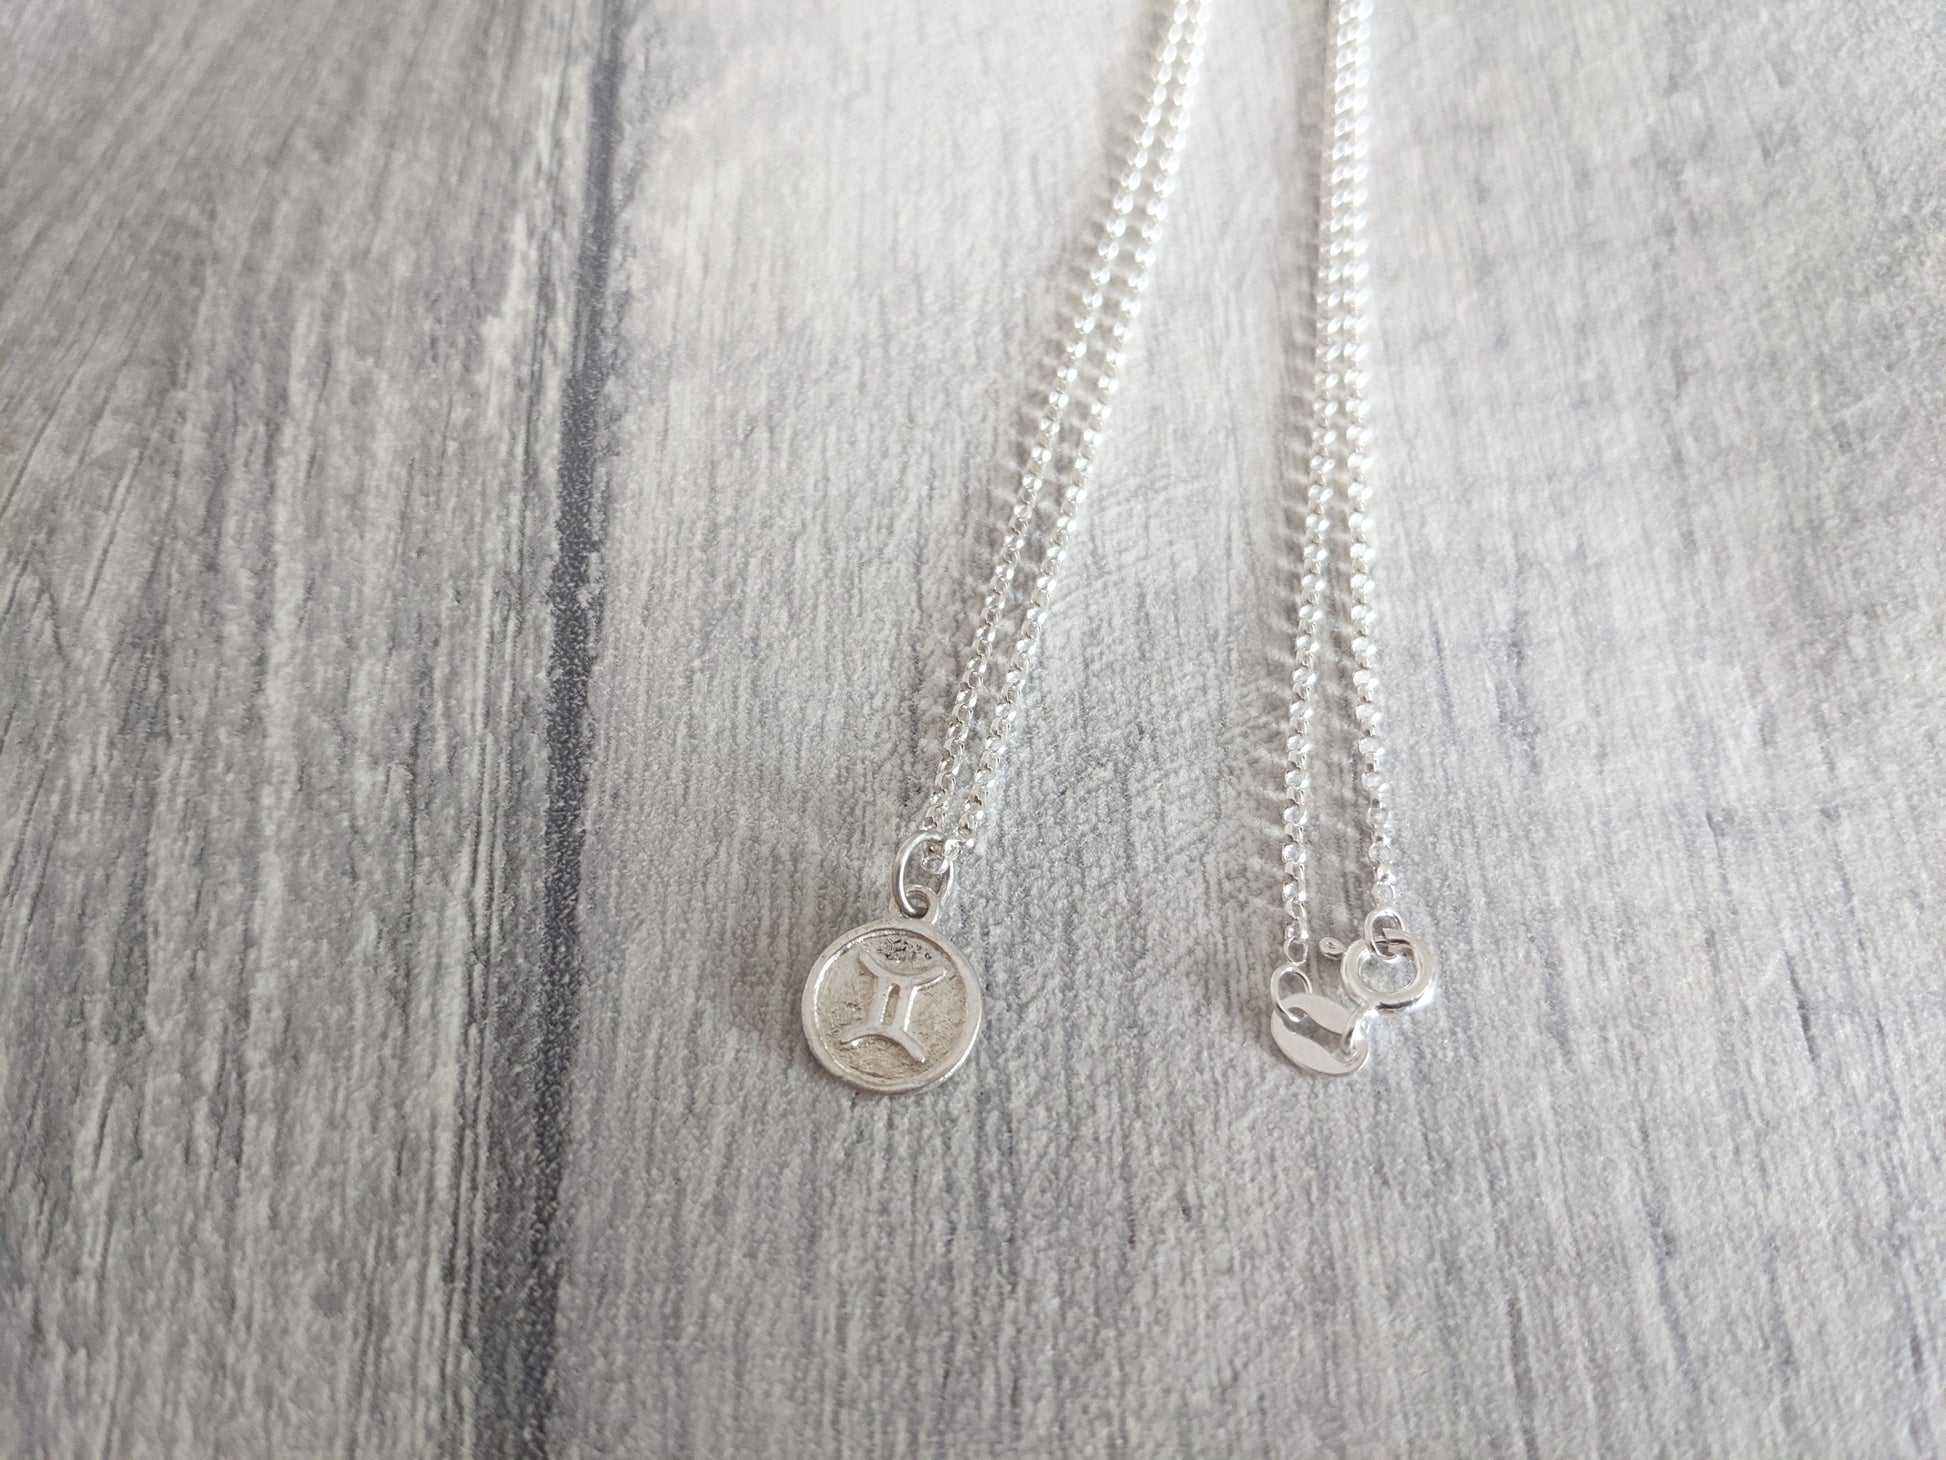 Gemini Star Sign Necklace - With Love Jewellery UK